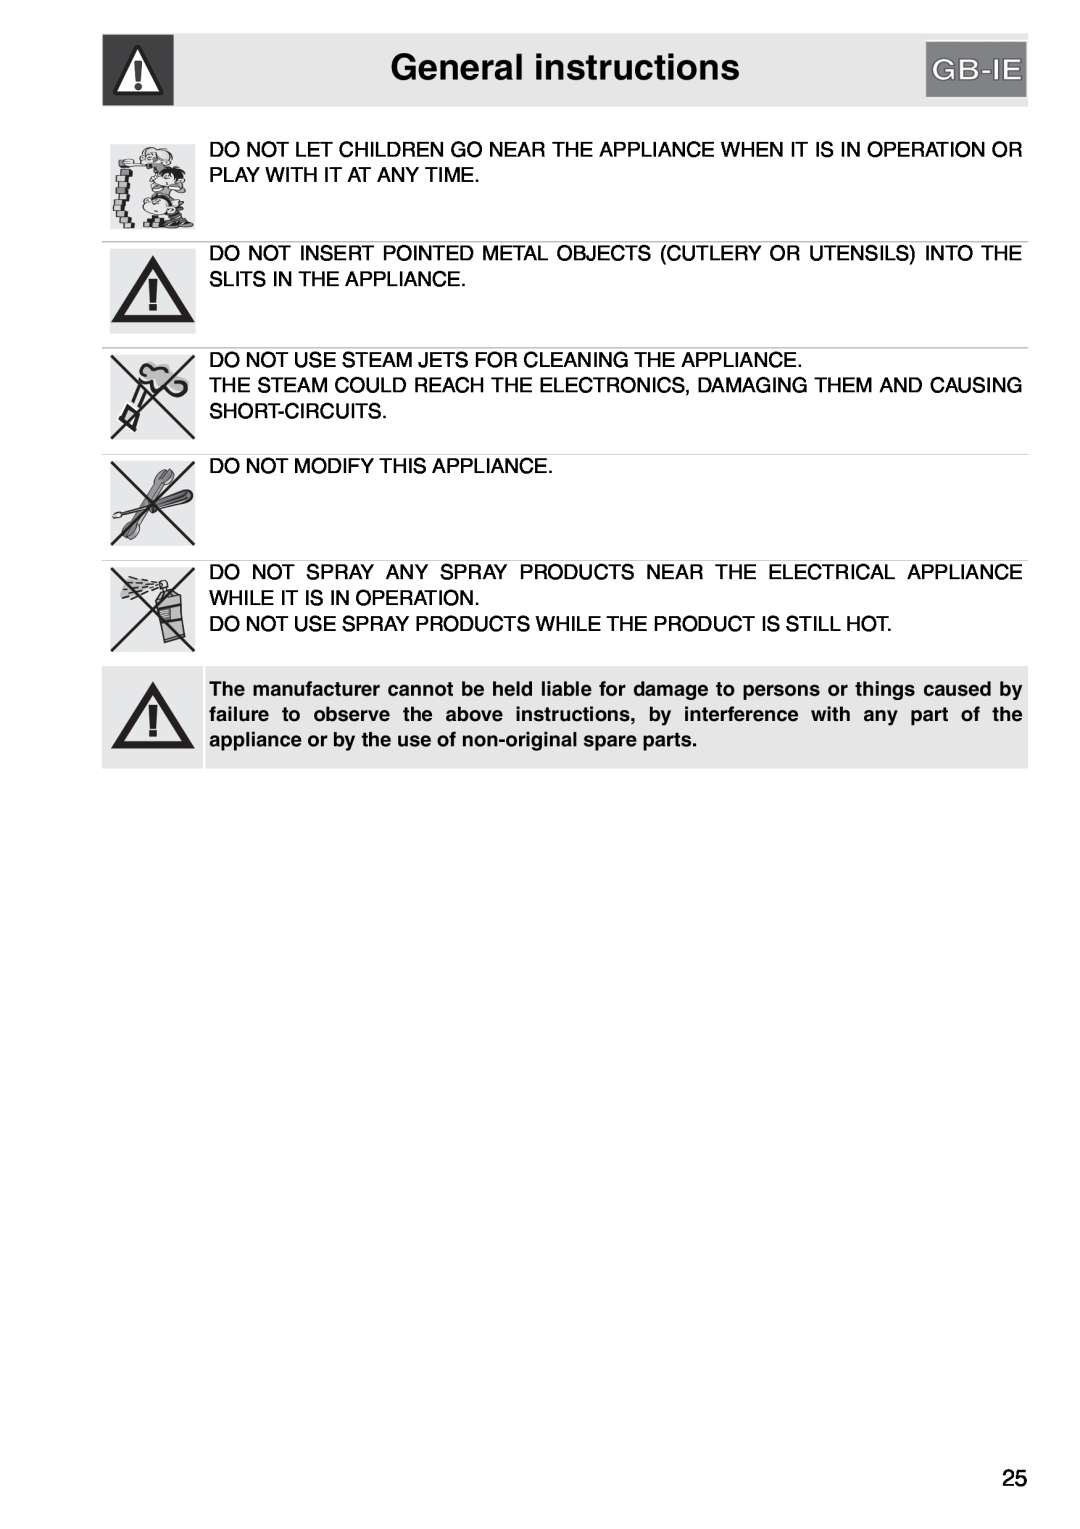 Smeg PGA64, gas cooktop manual General instructions, Do Not Use Steam Jets For Cleaning The Appliance 